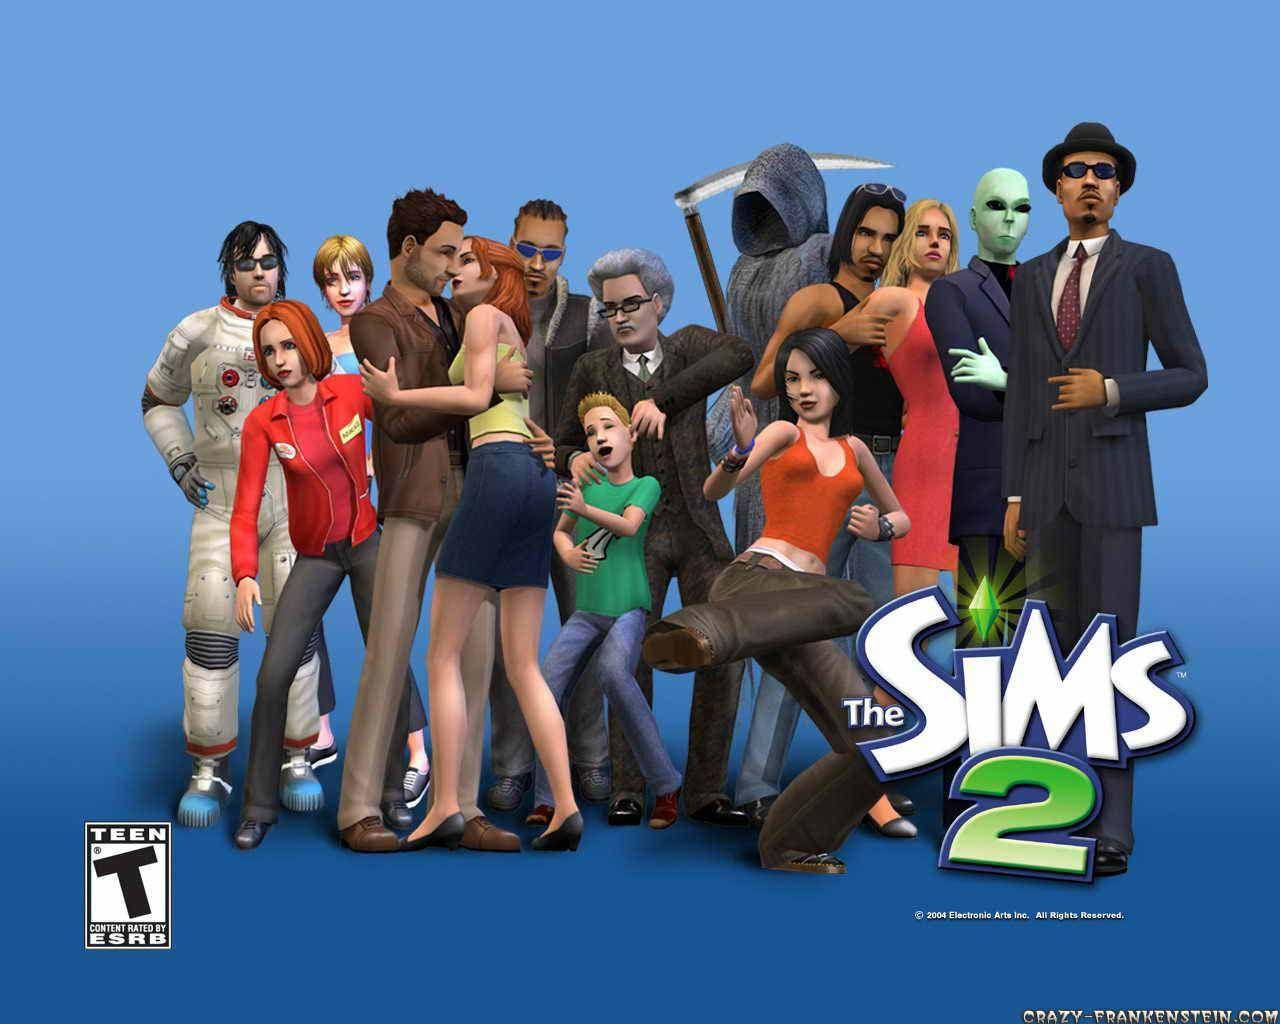 The Sims On Blue Wallpaper